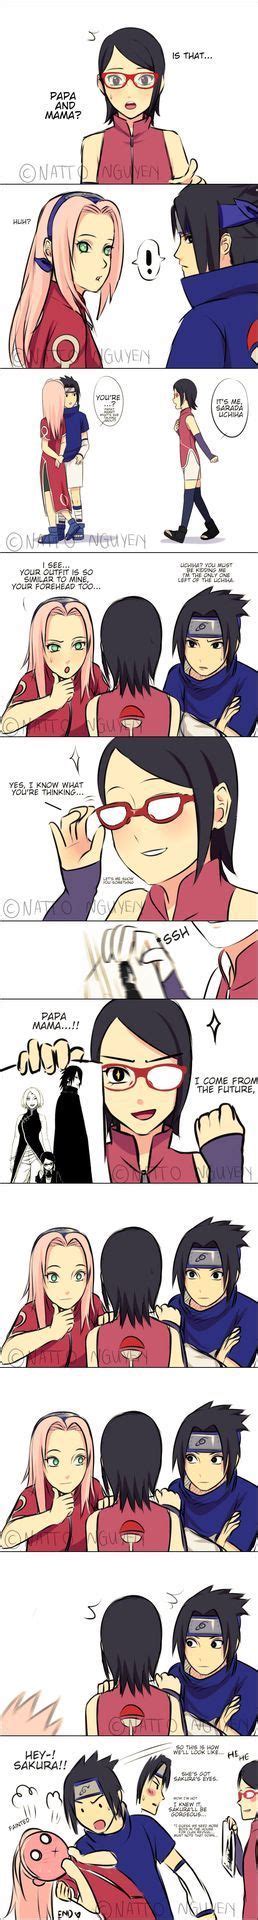 Adorable And Funny Sasusaku Images Funny Funny Comics In 2020